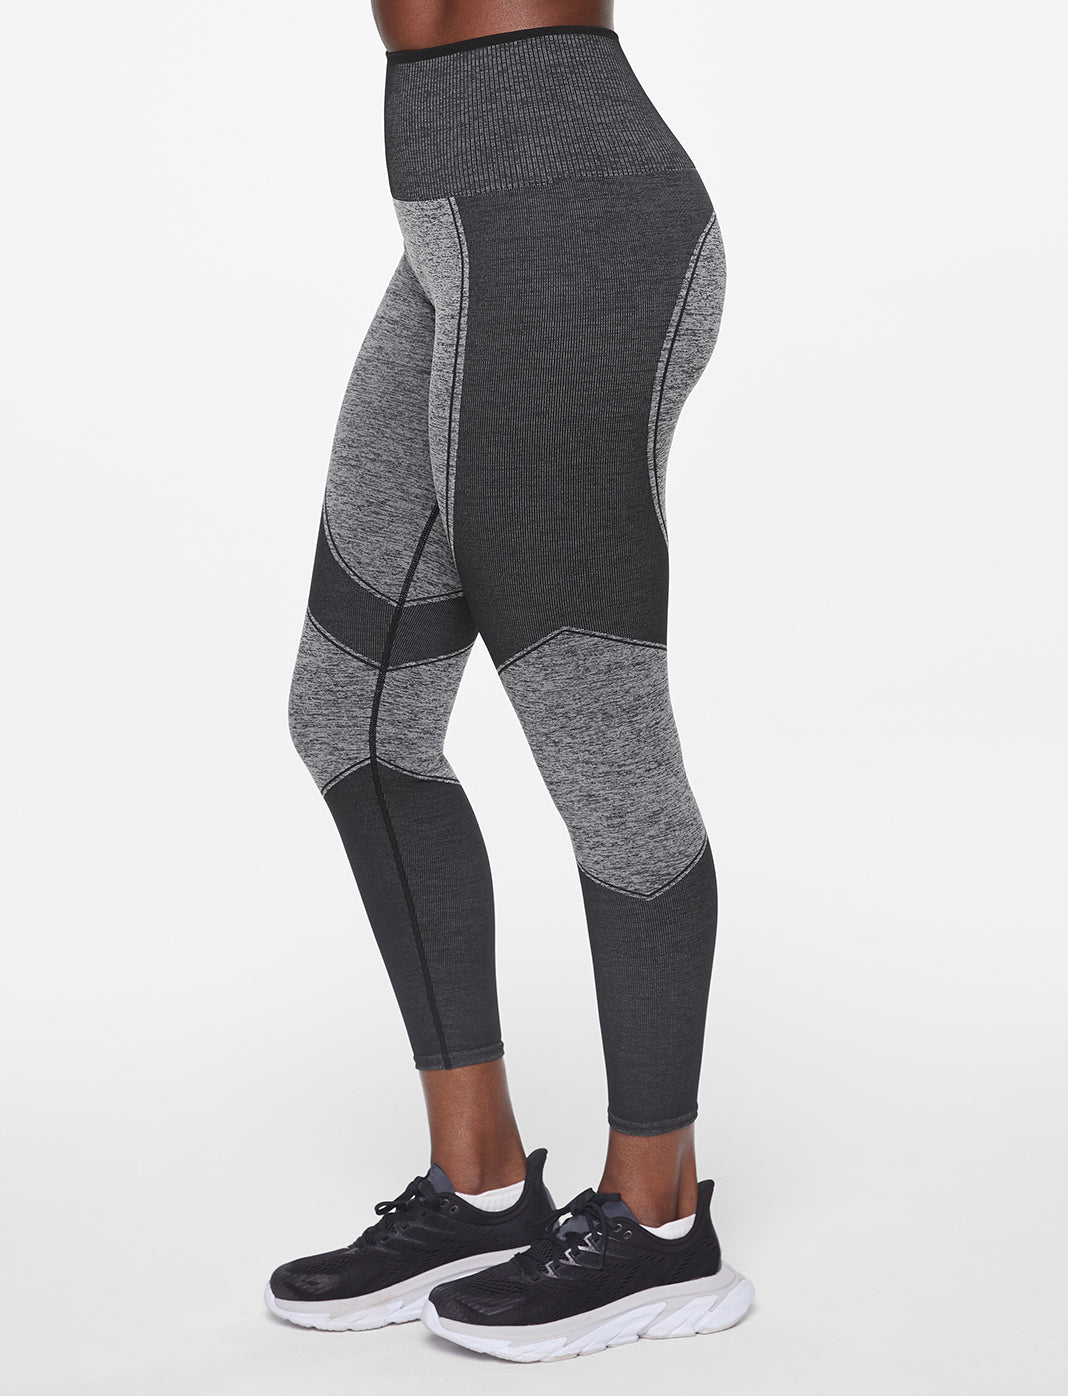 A Buttery Soft Legging: ThirdLove Muse Smoothing Legging